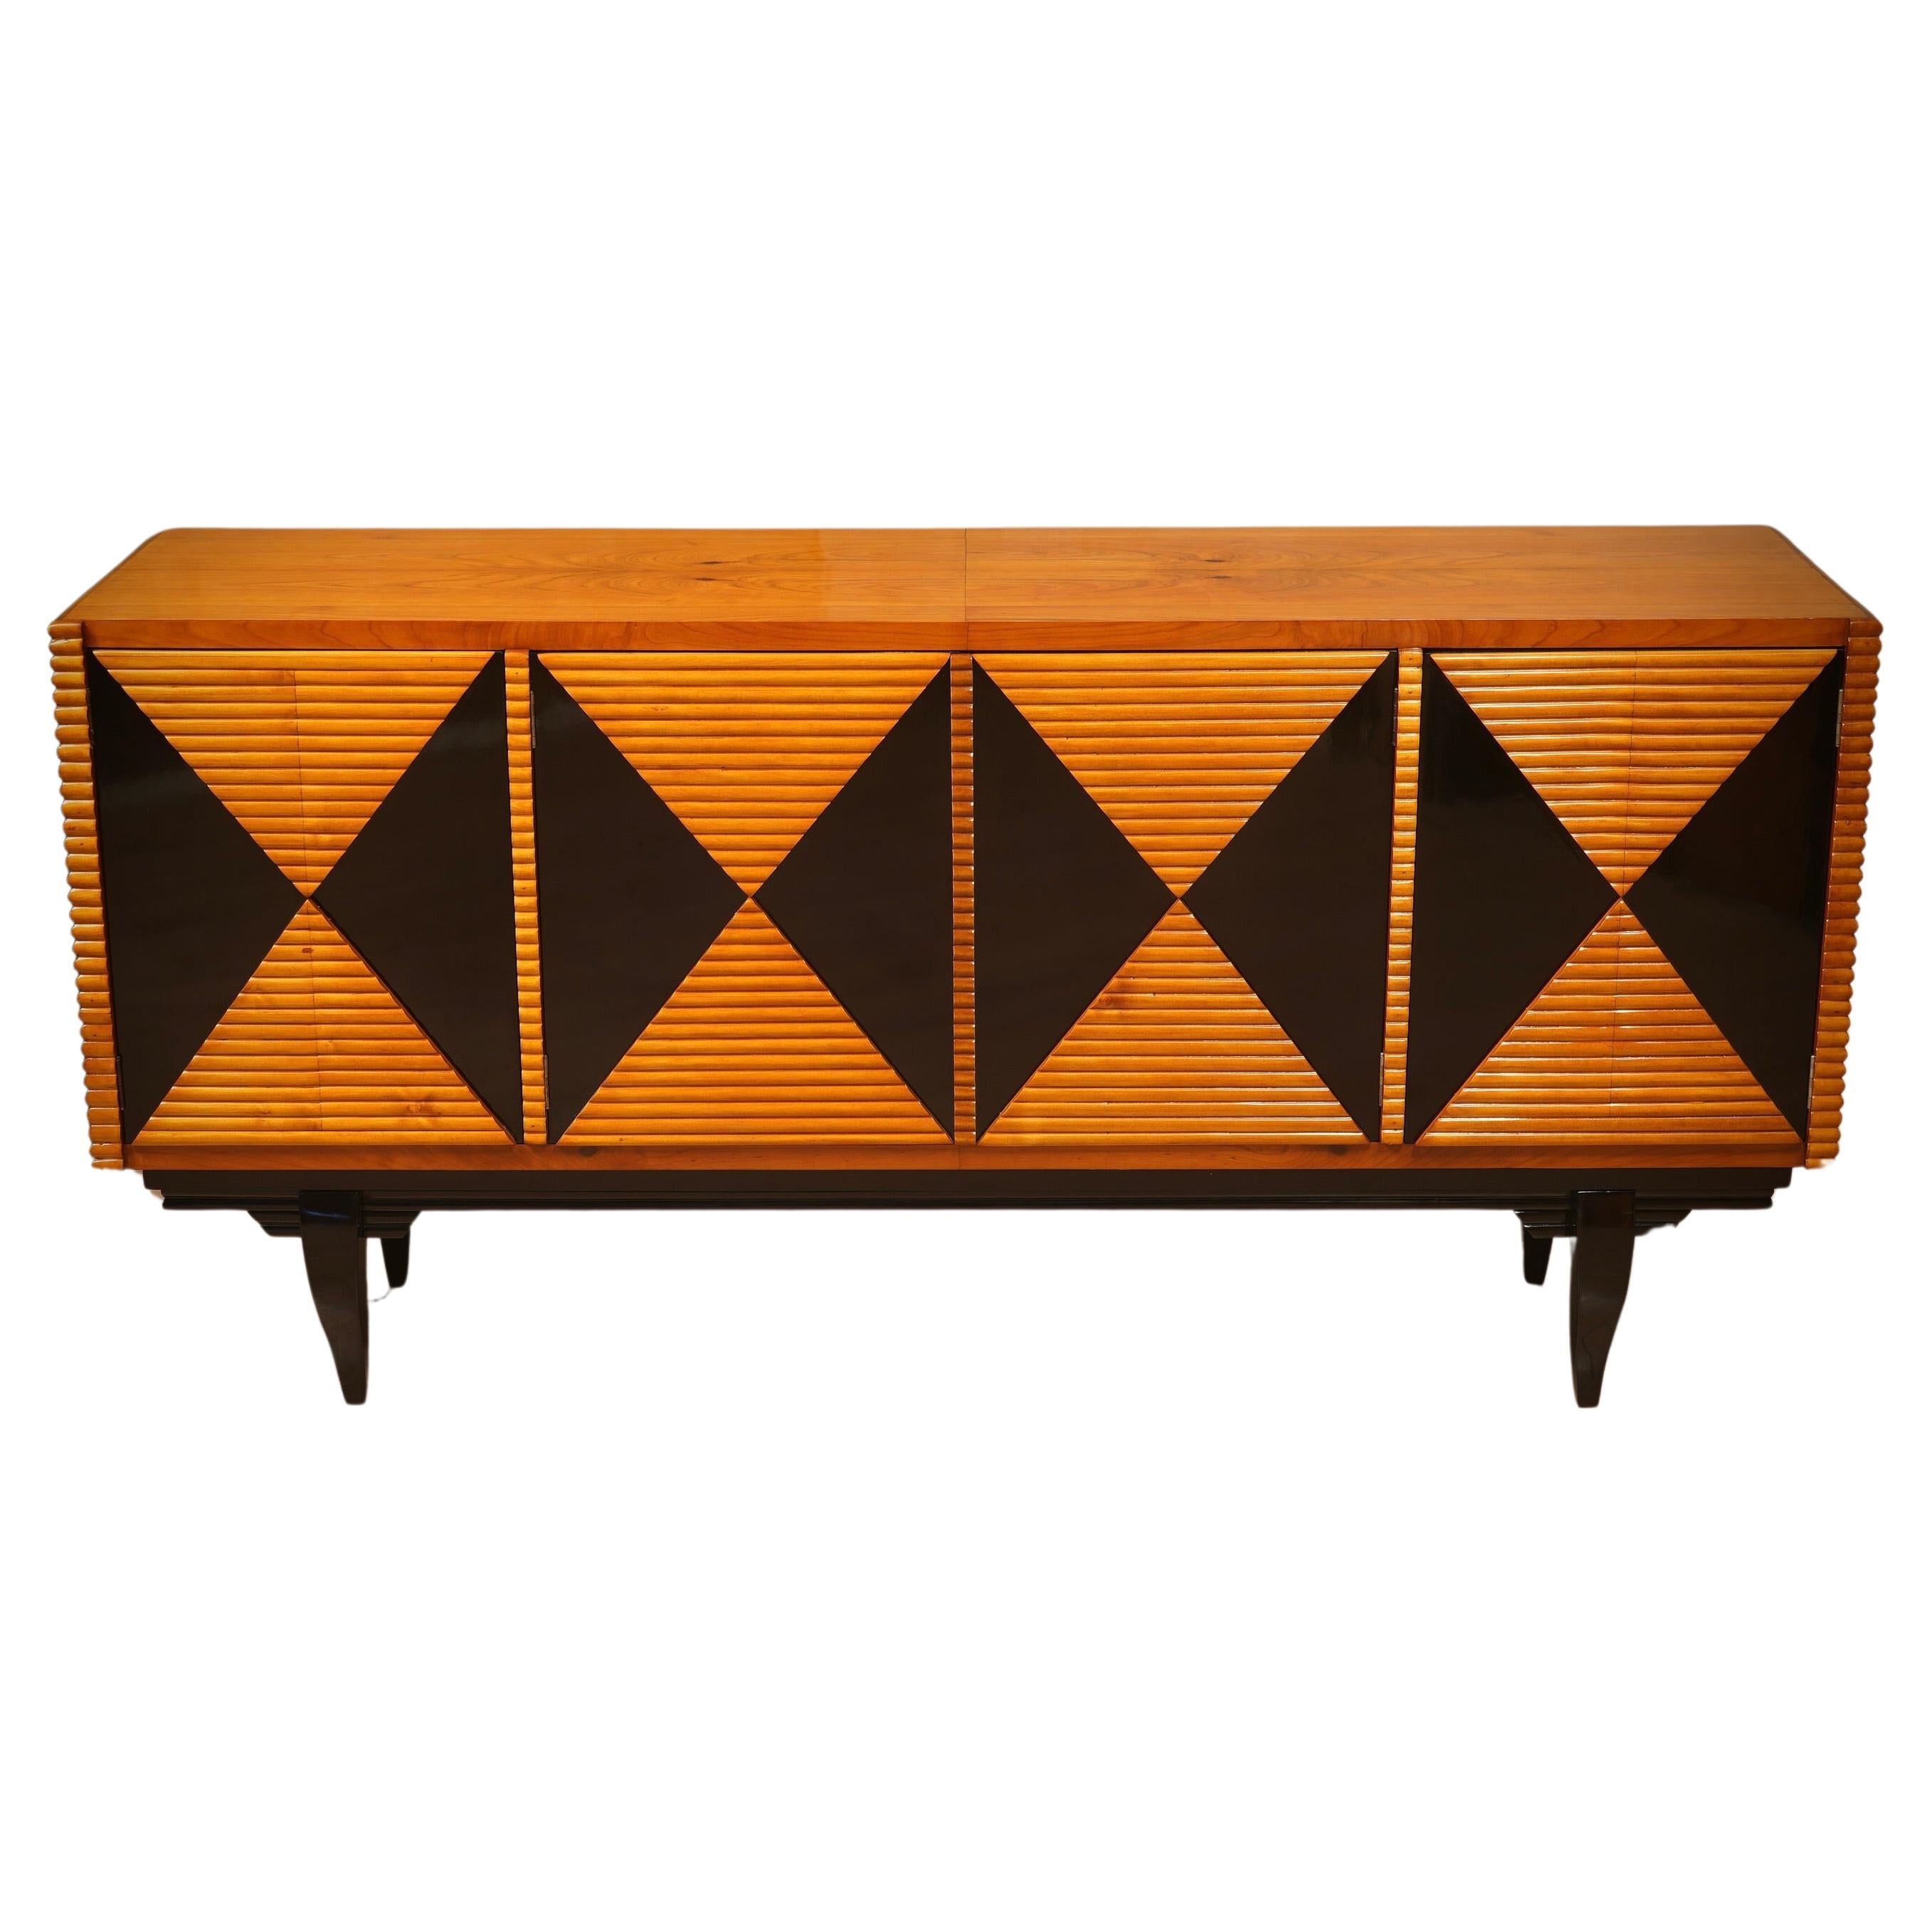 MidCentury Cherry Wood Italian Sideboard Credenza Buffet, 1950 For Sale